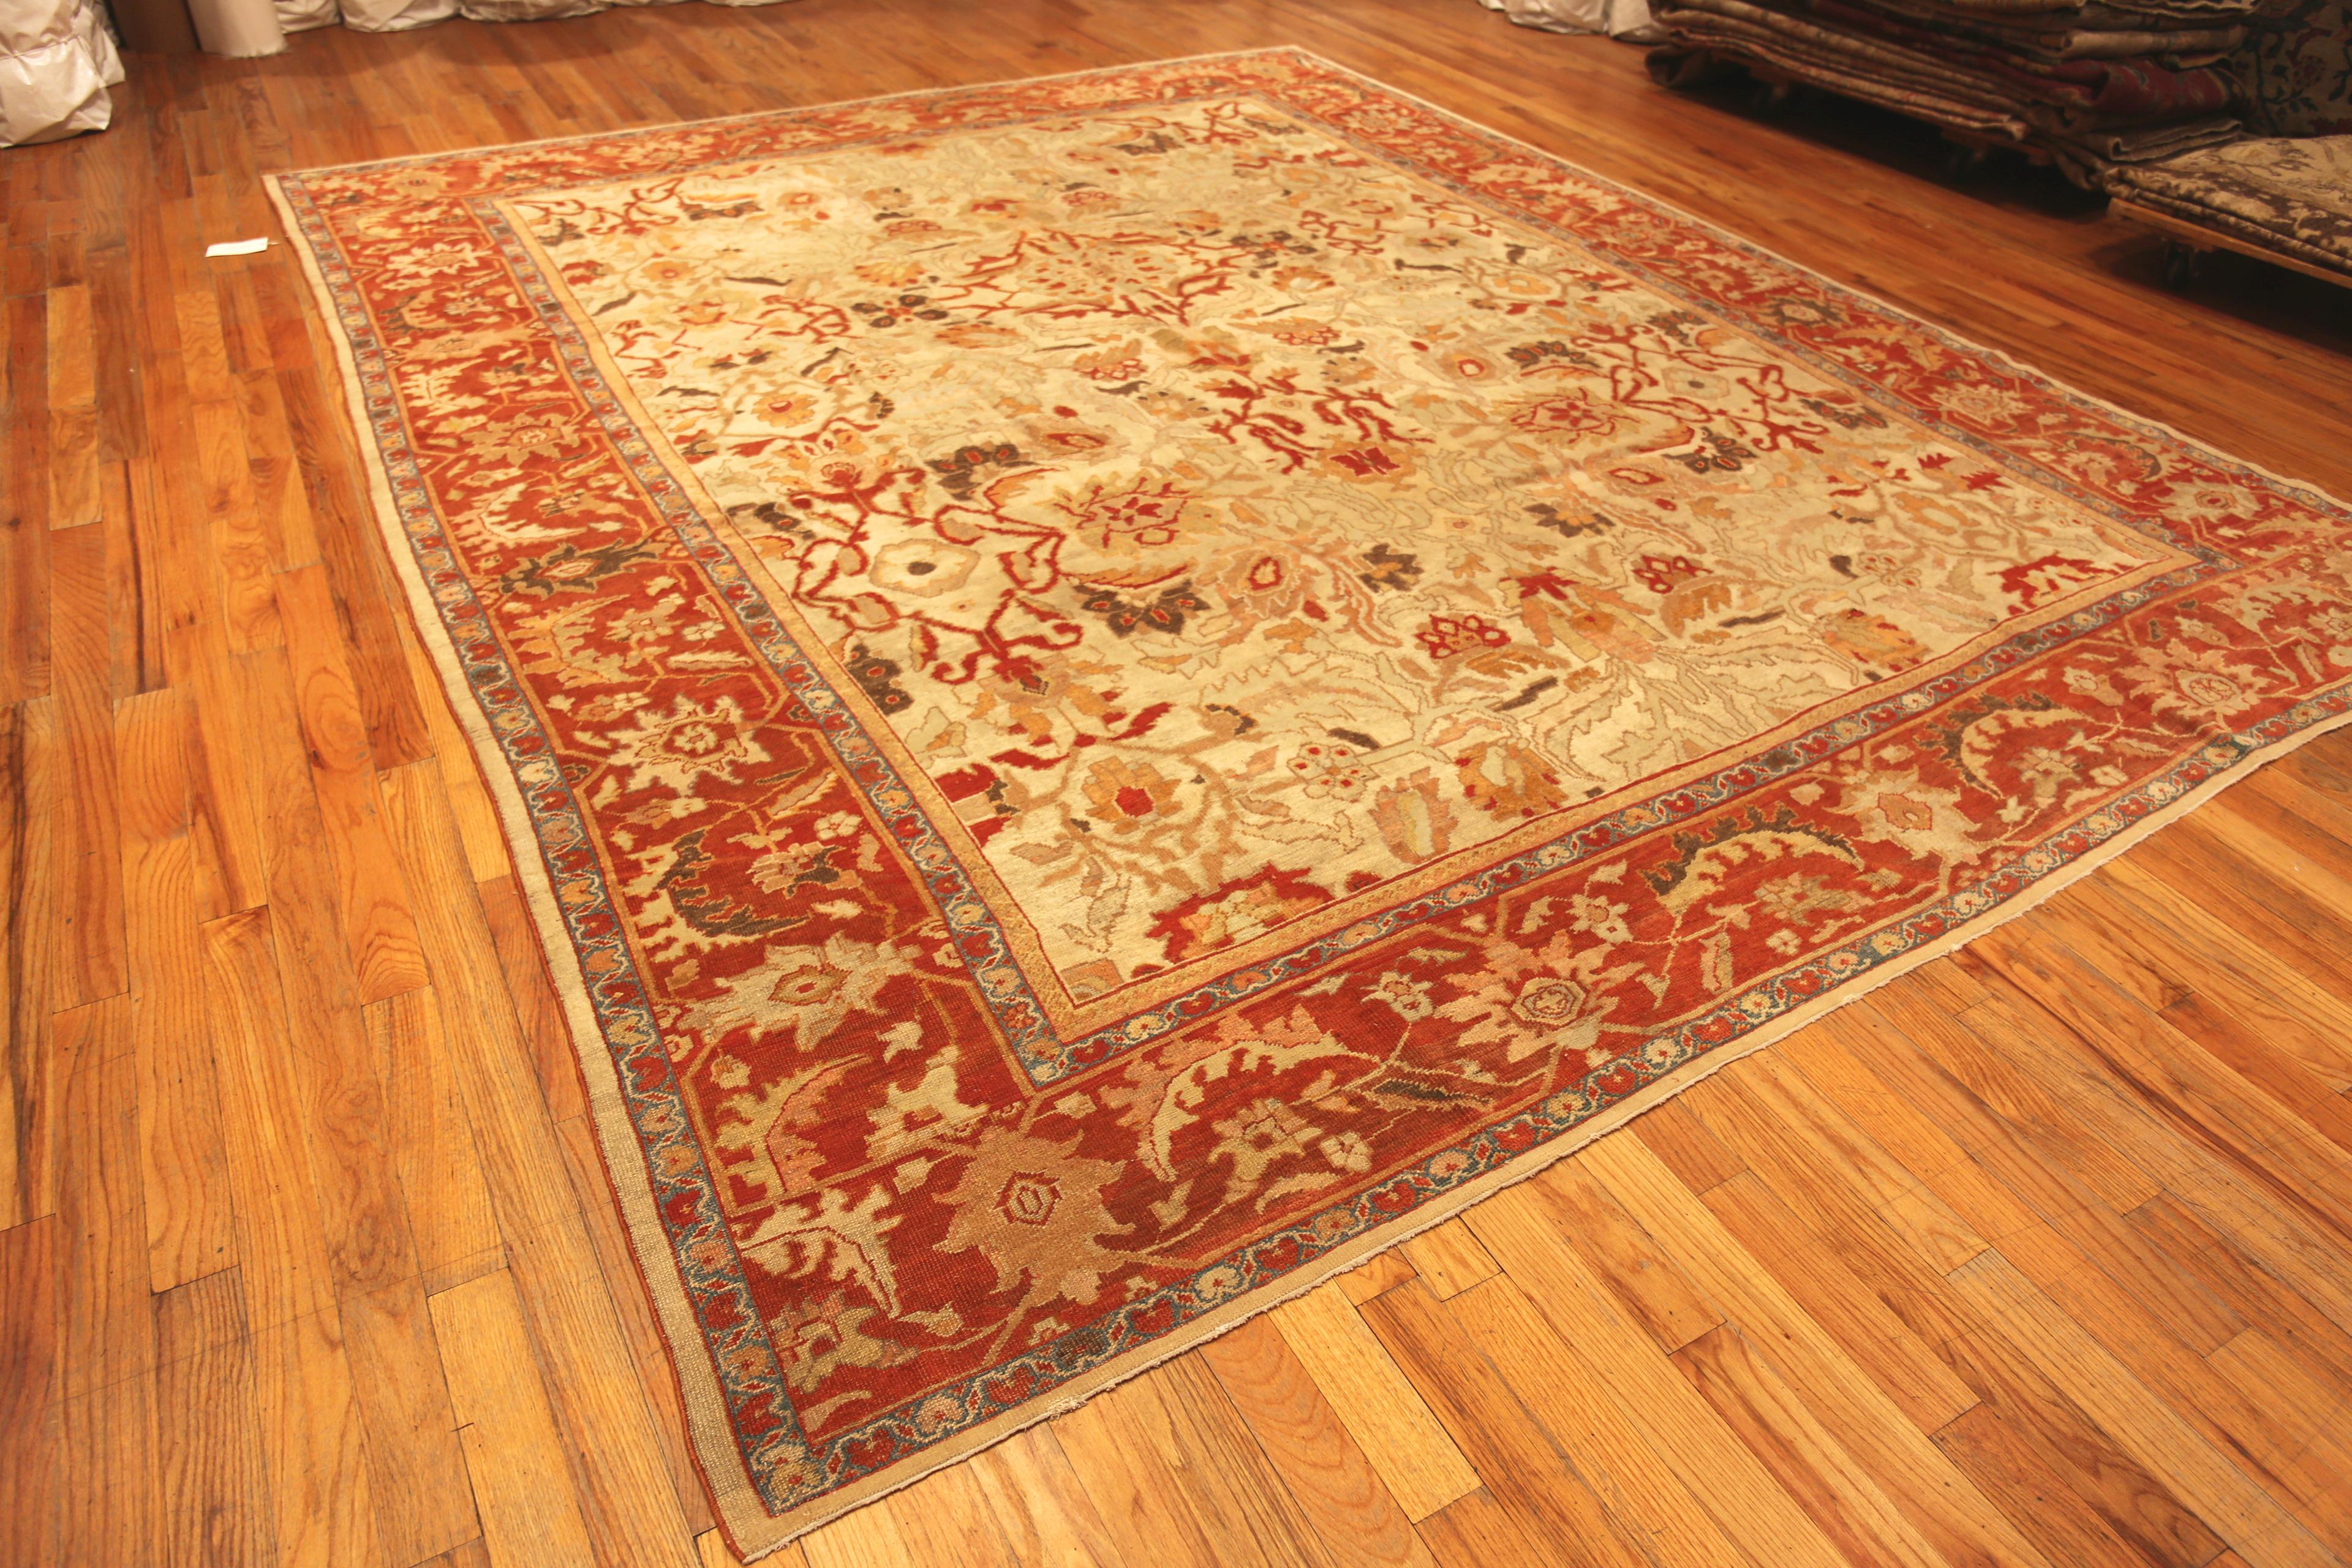 Rustic Ivory Antique Decorative Persian Sultanabad Rug, Country of Origin: Persia, Circa Date: 1880. Size: 11 ft 3 in x 13 ft 7 in (3.43 m x 4.14 m)